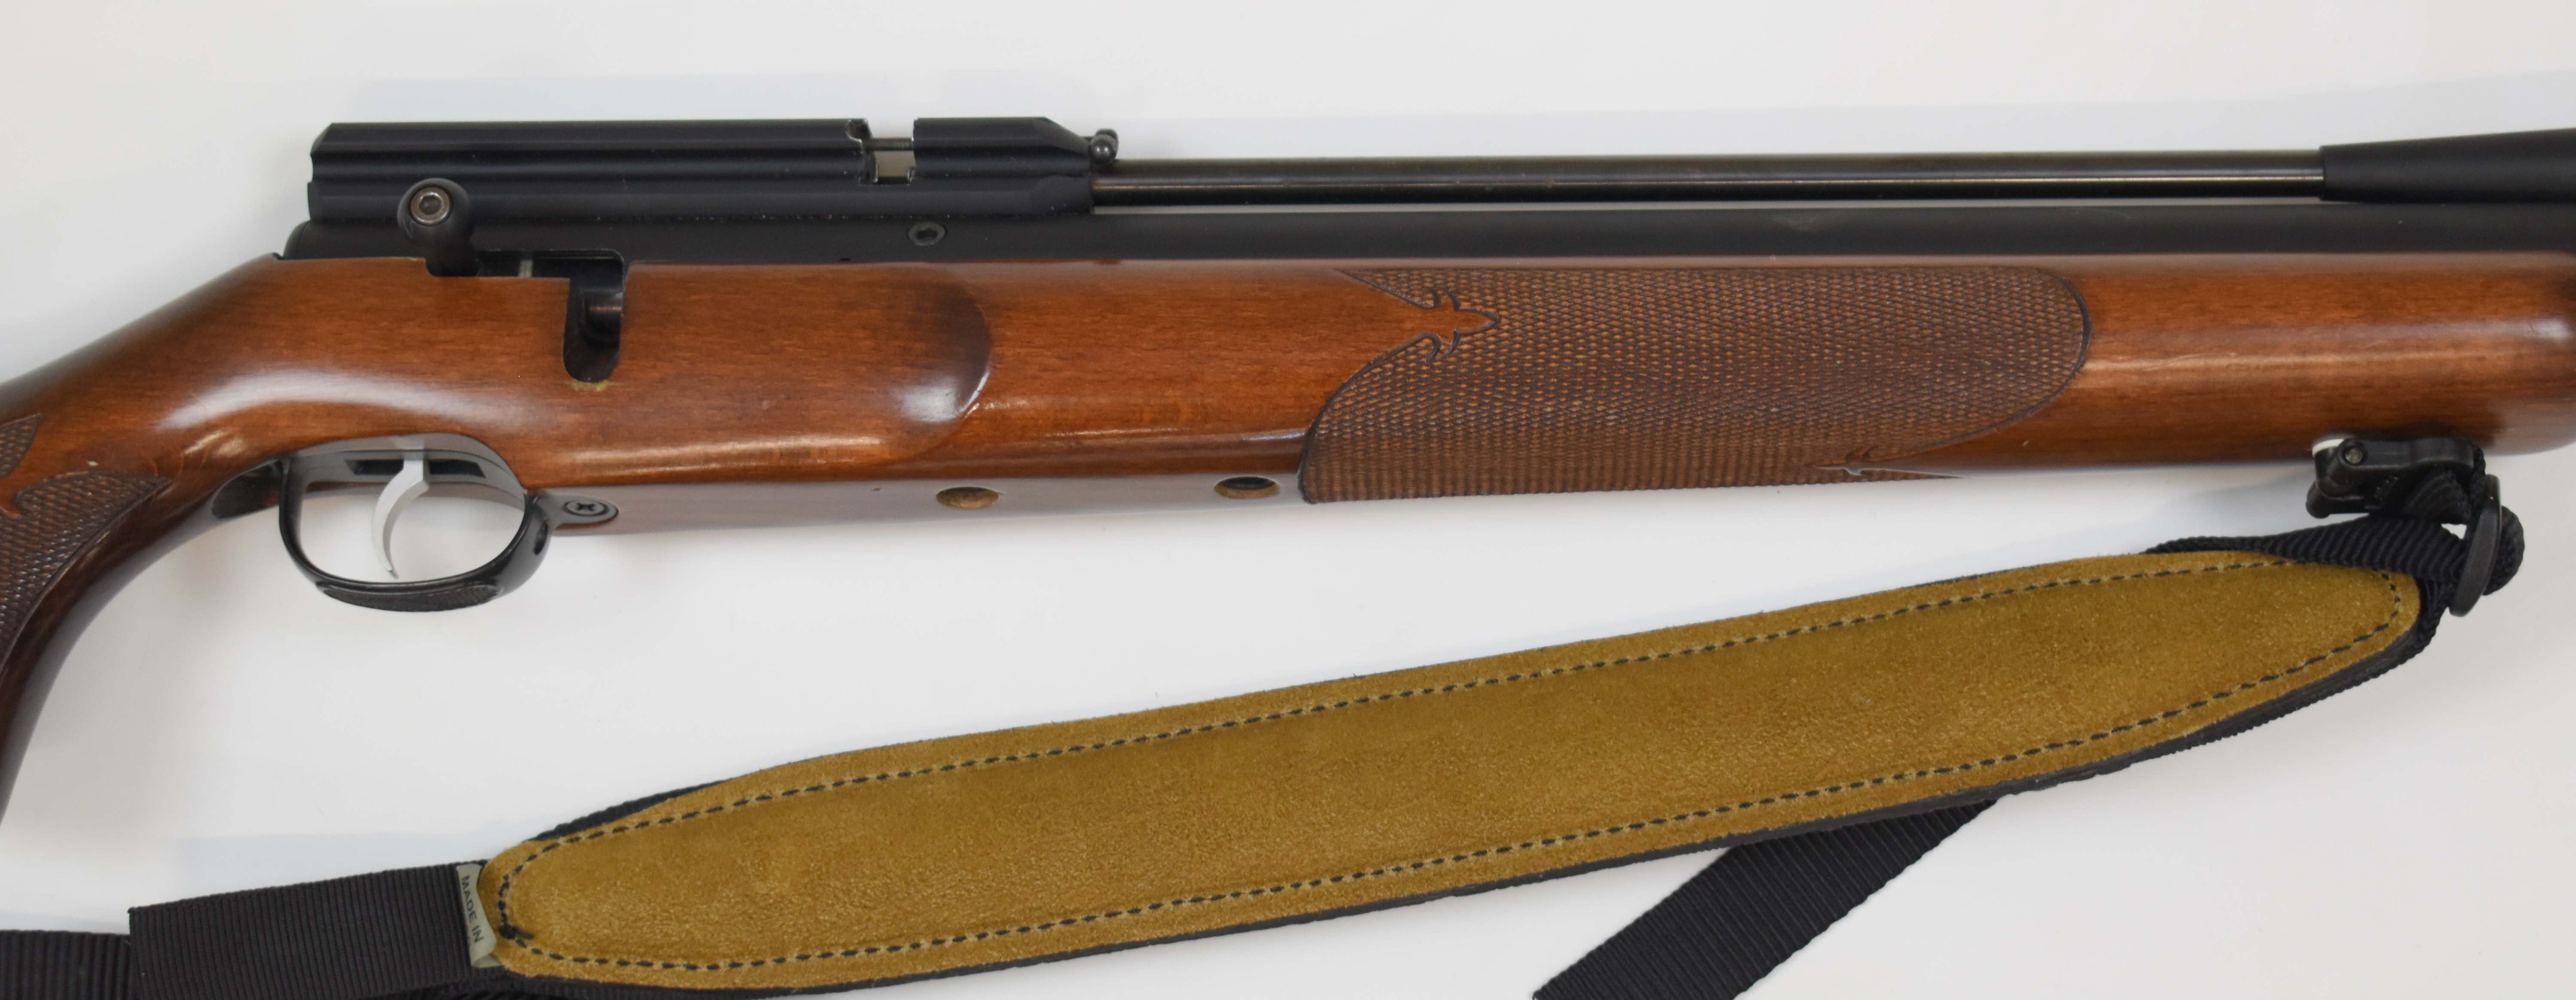 Webley Axsor .22 PCP air rifle with chequered semi-pistol grip and forend, raised cheek piece, - Image 14 of 20